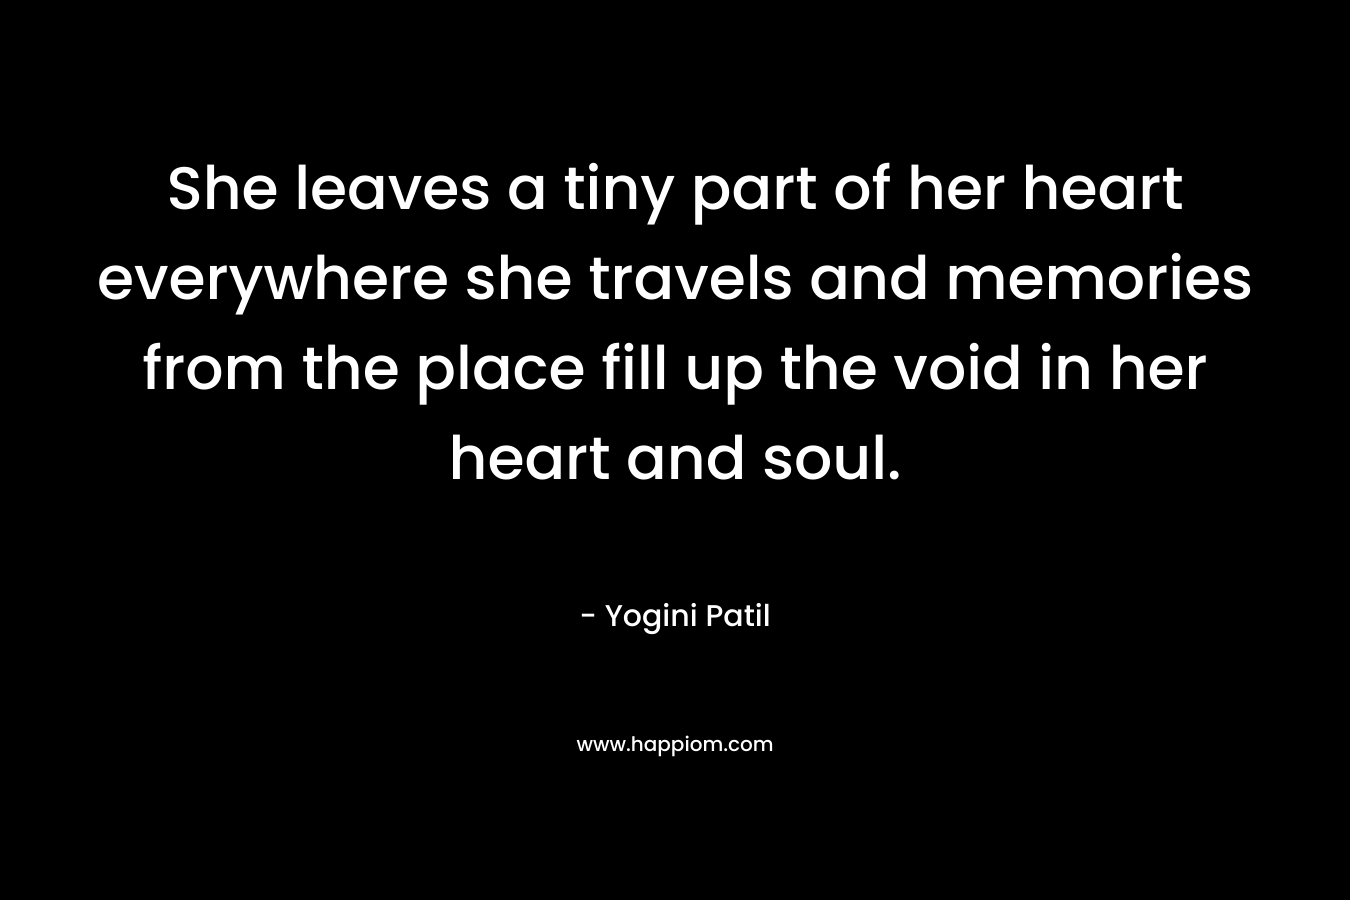 She leaves a tiny part of her heart everywhere she travels and memories from the place fill up the void in her heart and soul. – Yogini Patil